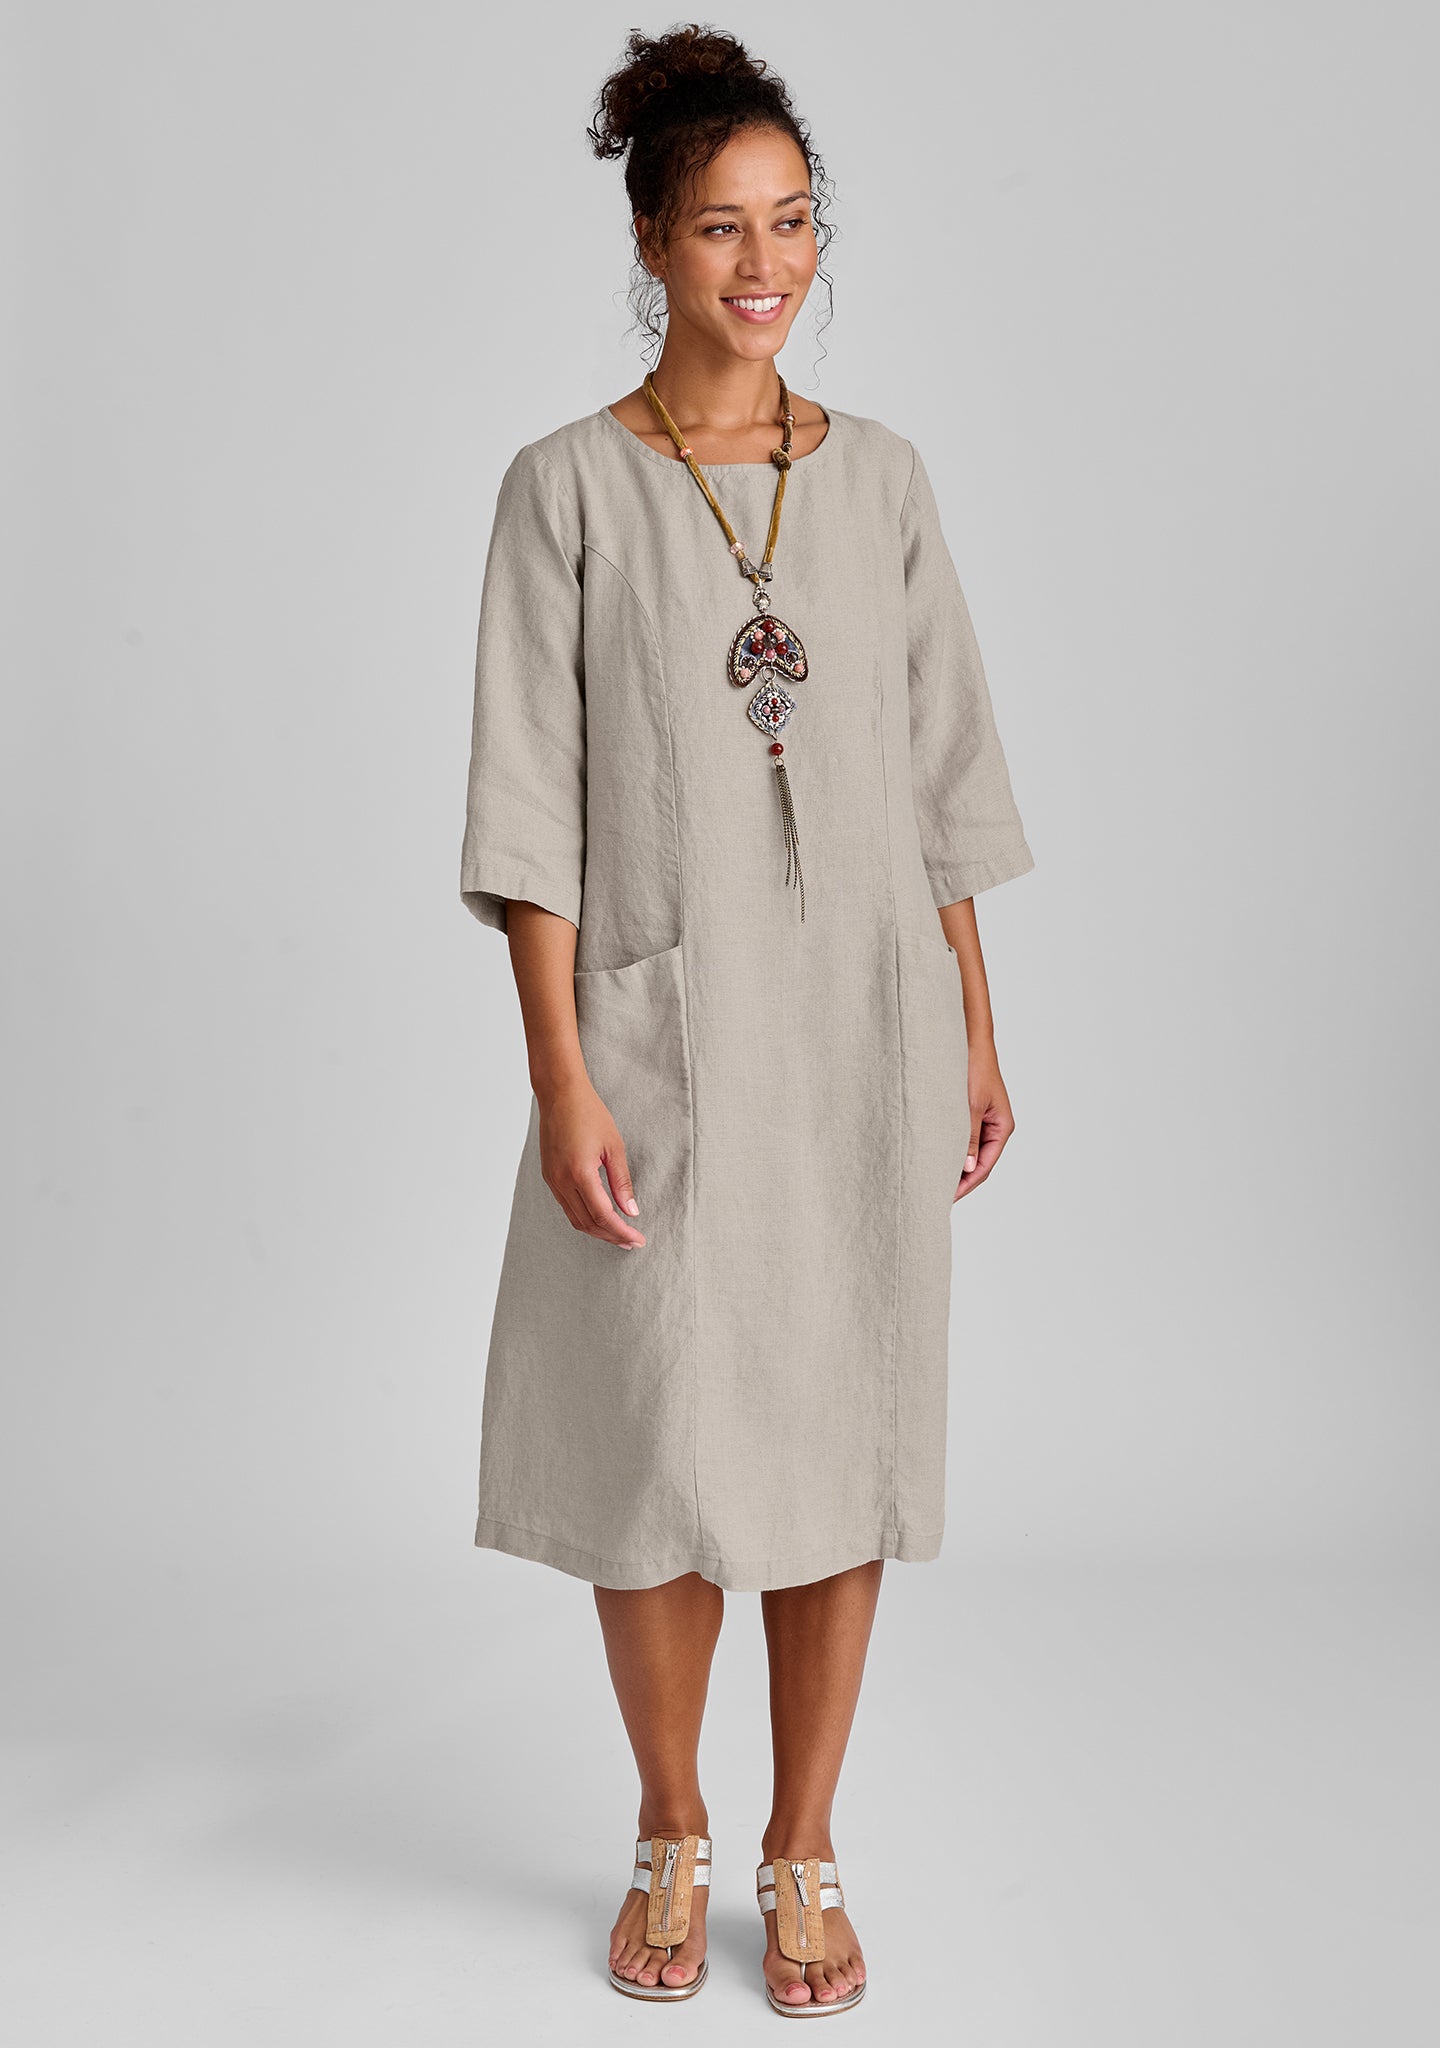 Linen Clothing for Women - 100% Natural French Linen